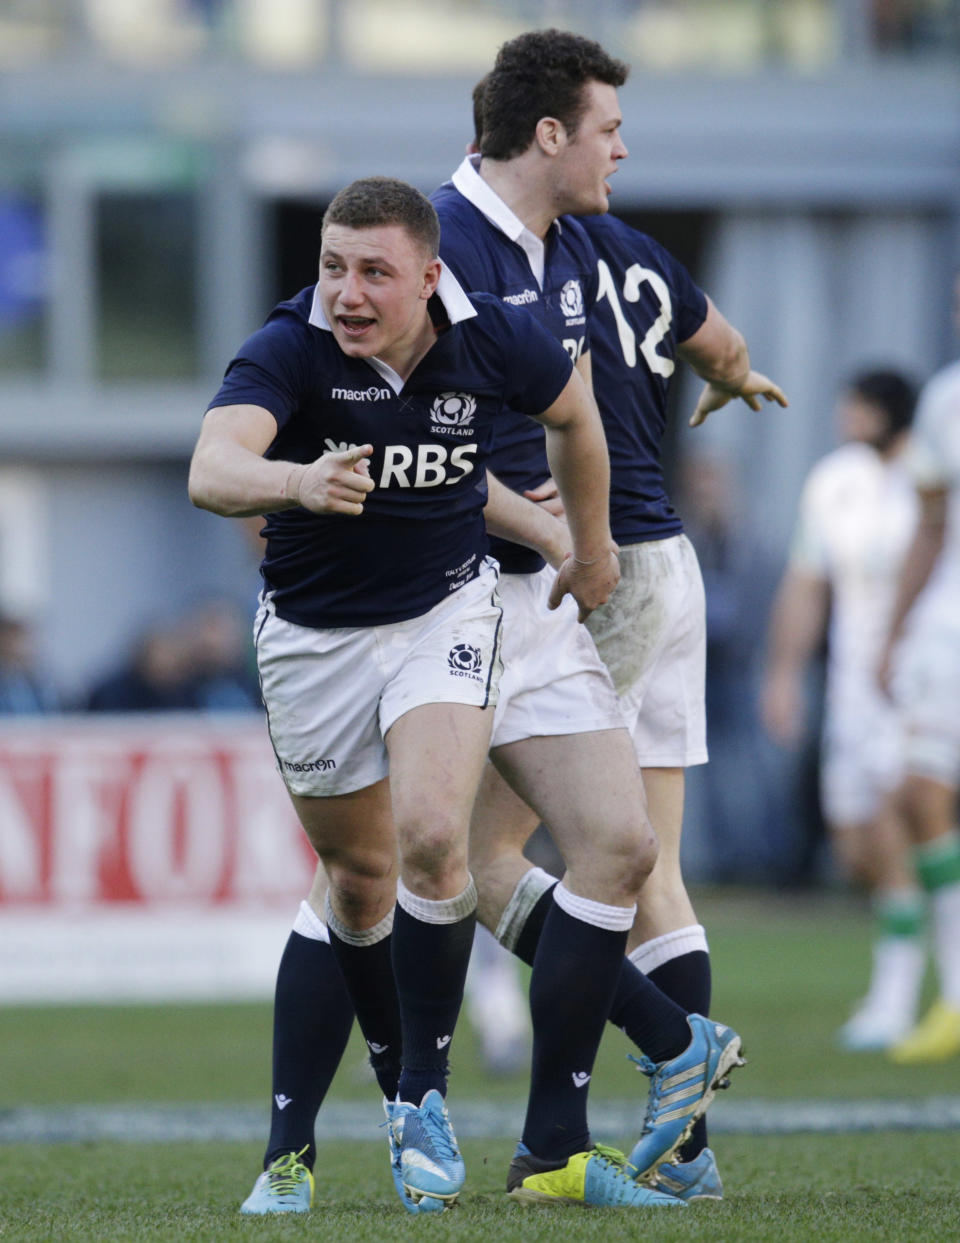 Scotland's Duncan Weir celebrates after he scored the match winning point during a Six Nations rugby union international match between Italy and Scotland, in Rome, Saturday, Feb. 22, 2014. Scotland won 21-20. (AP Photo/Andrew Medichini)